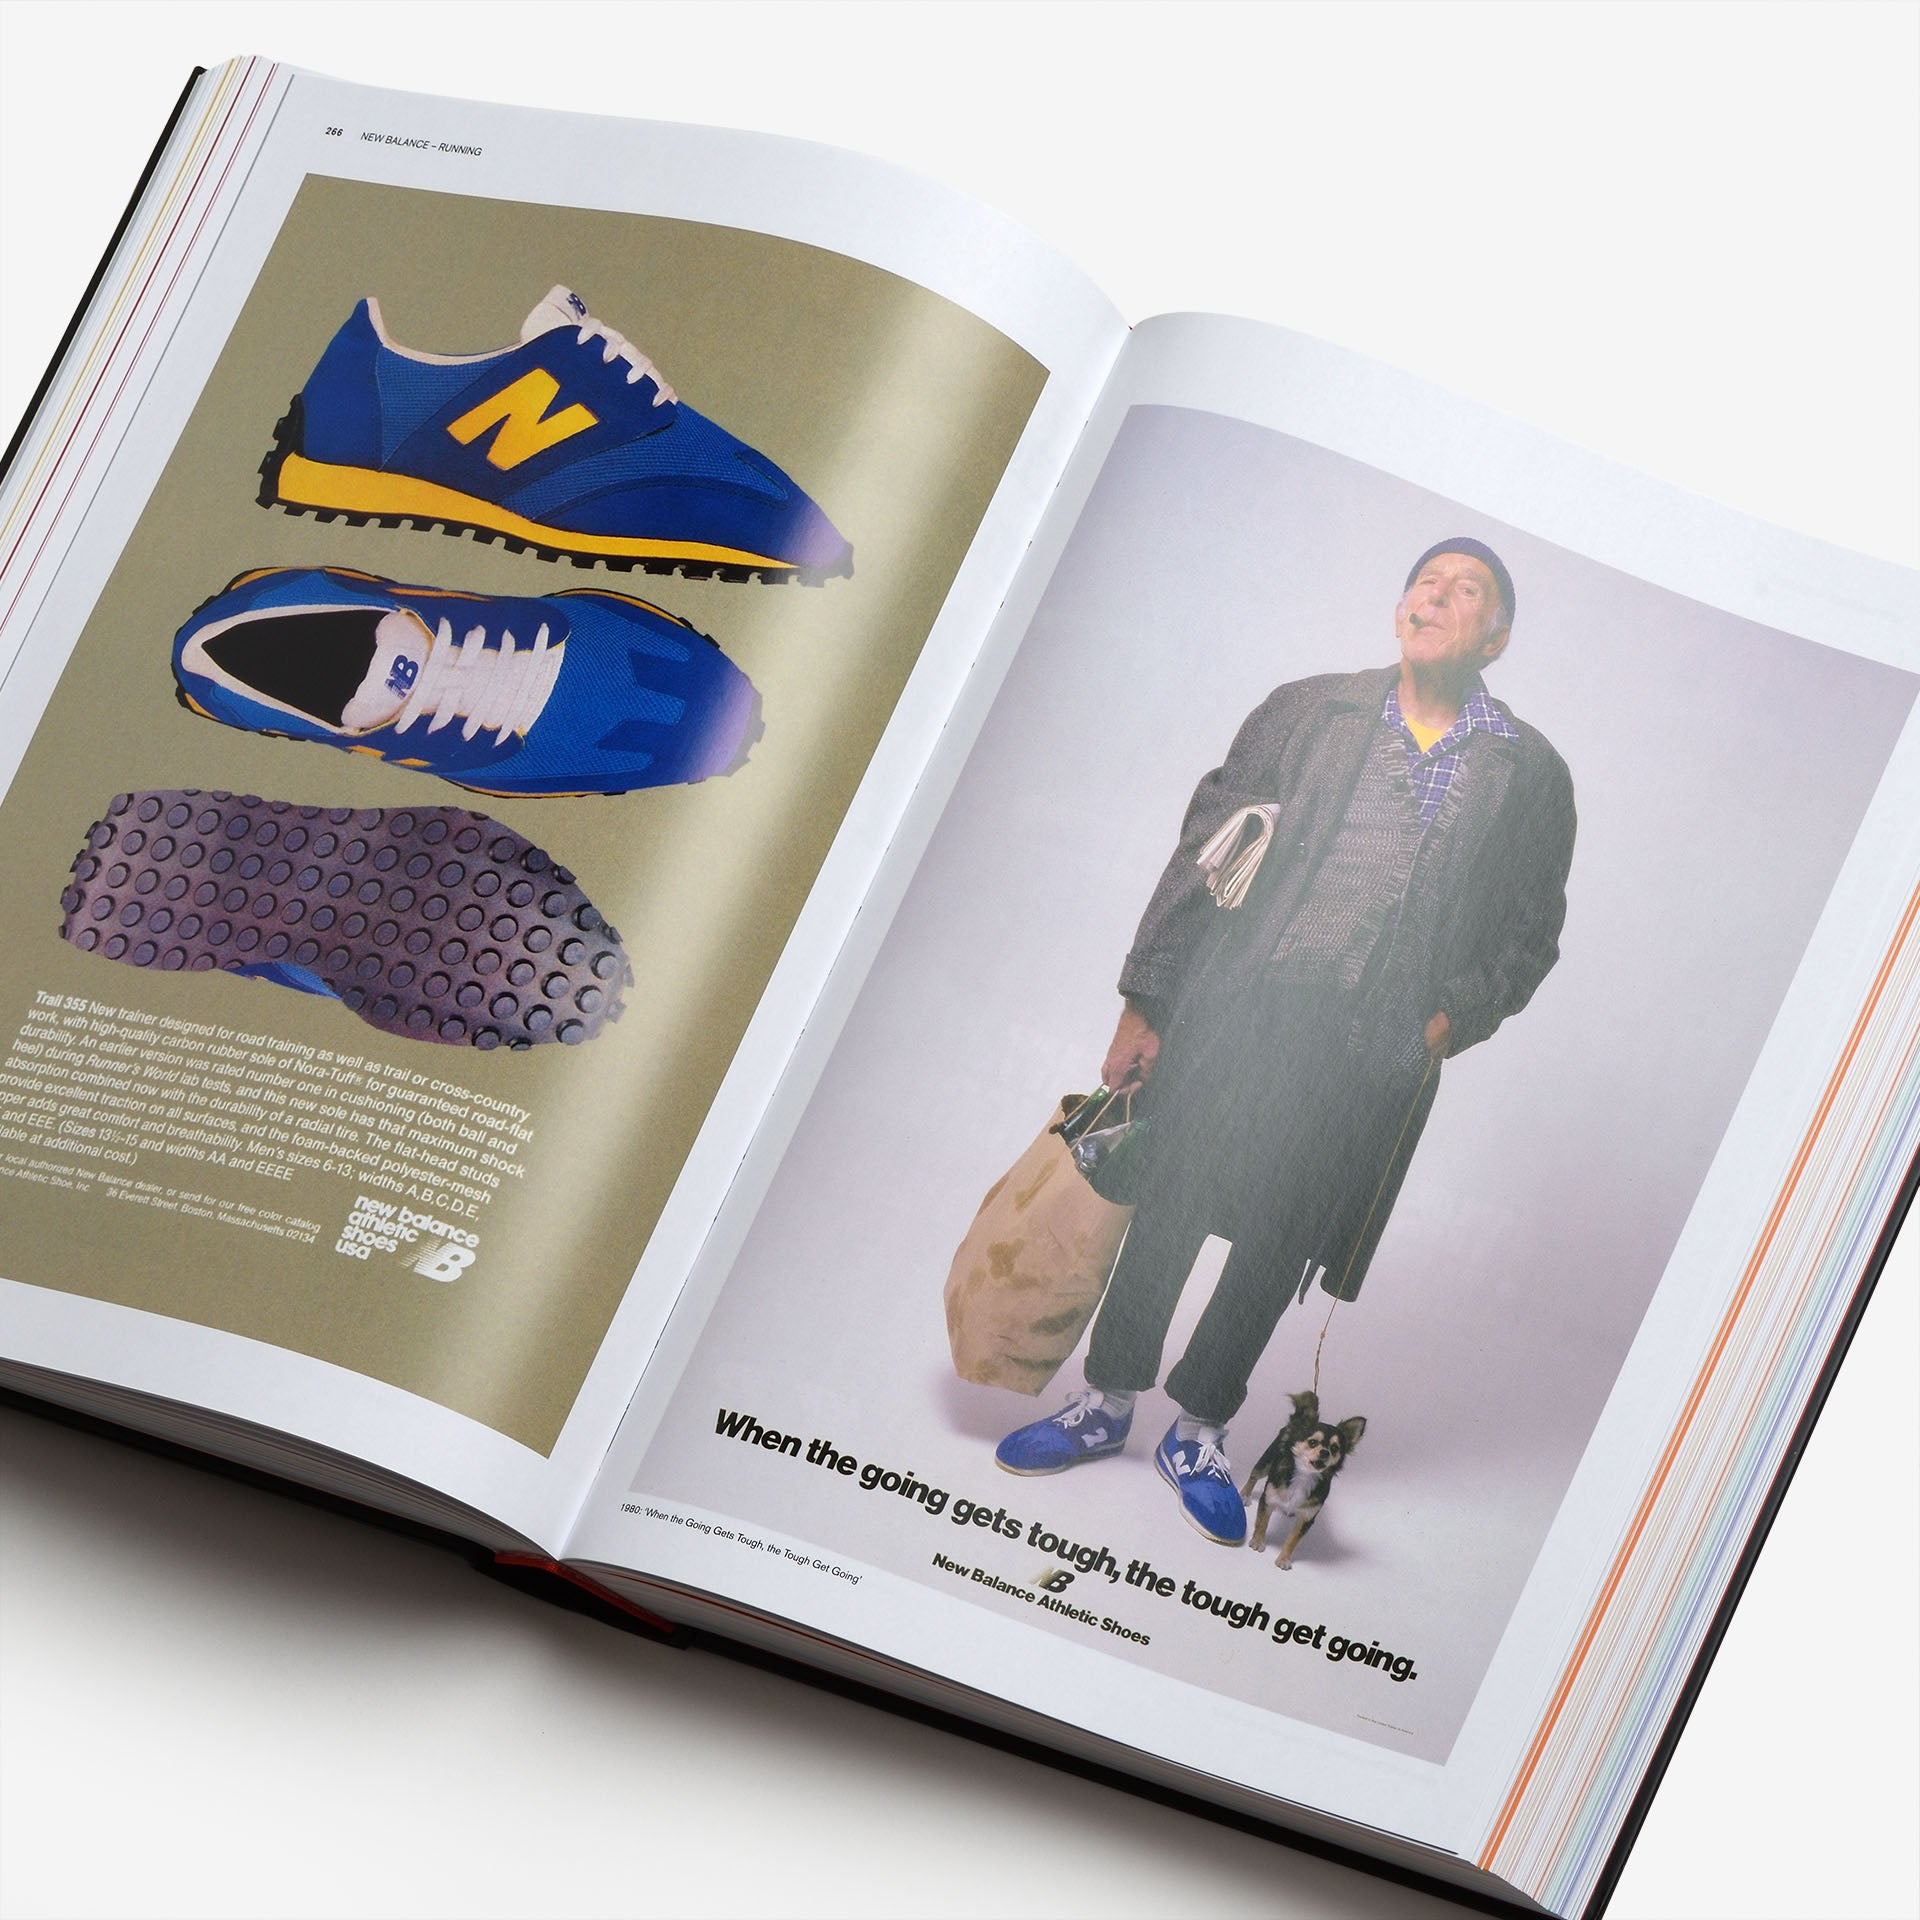 Soled Out: The Golden Age of Sneaker Advertising